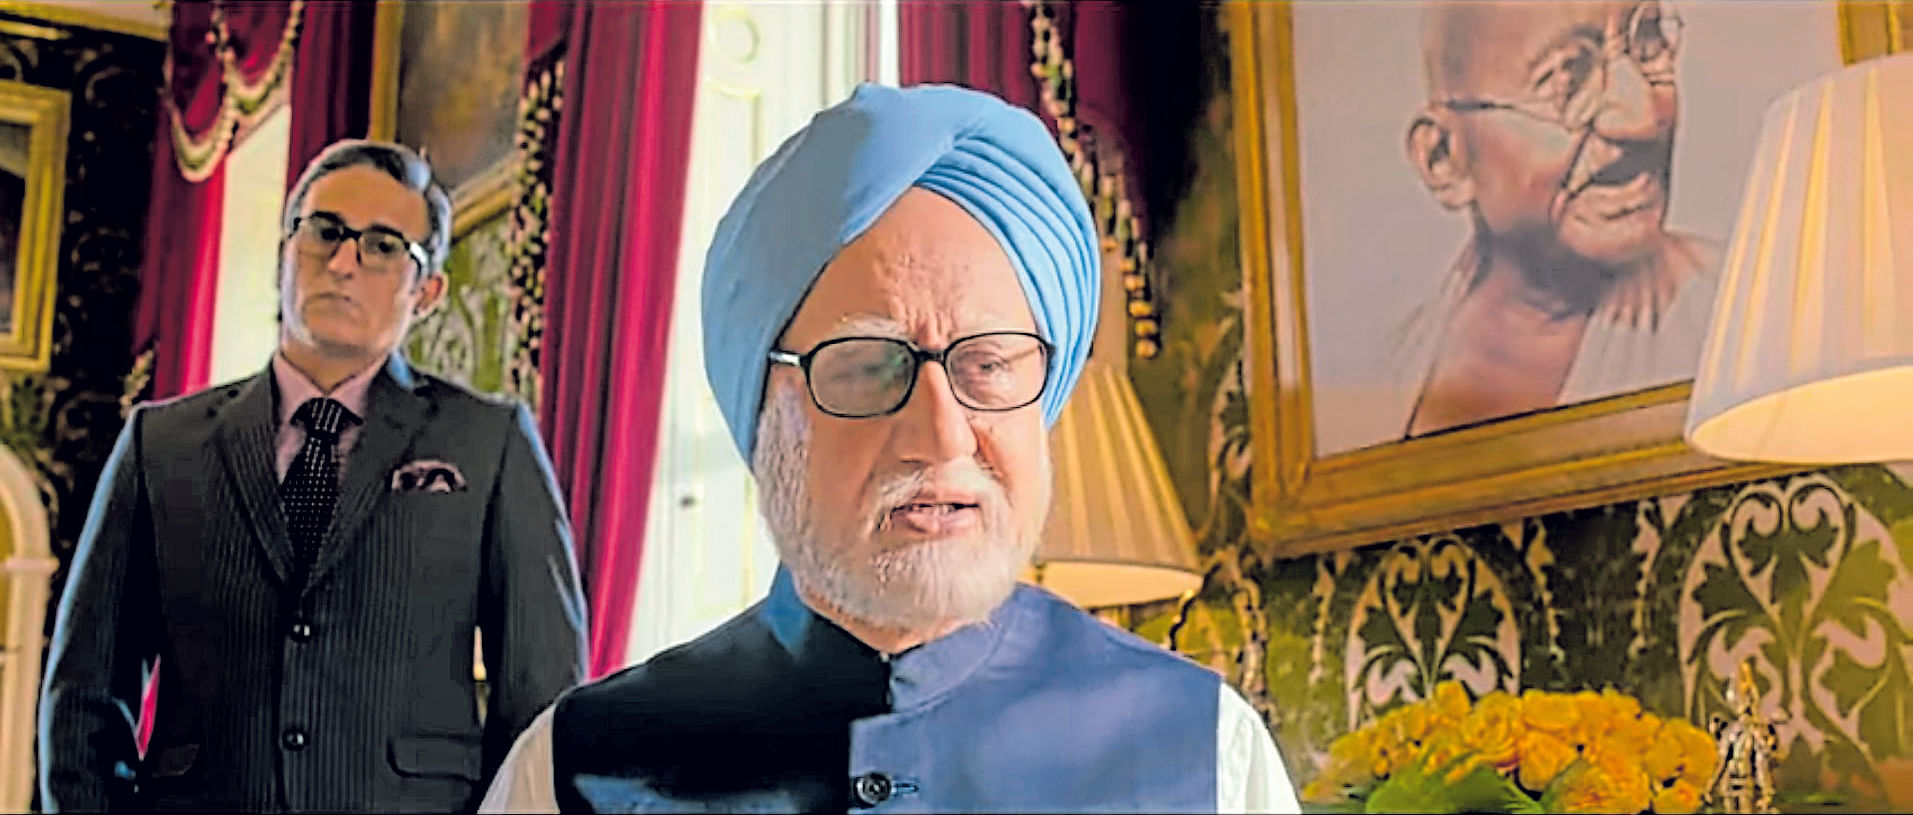 The Accidental Prime Minister was supposed to be a revelatory movie but critics were not impressed.